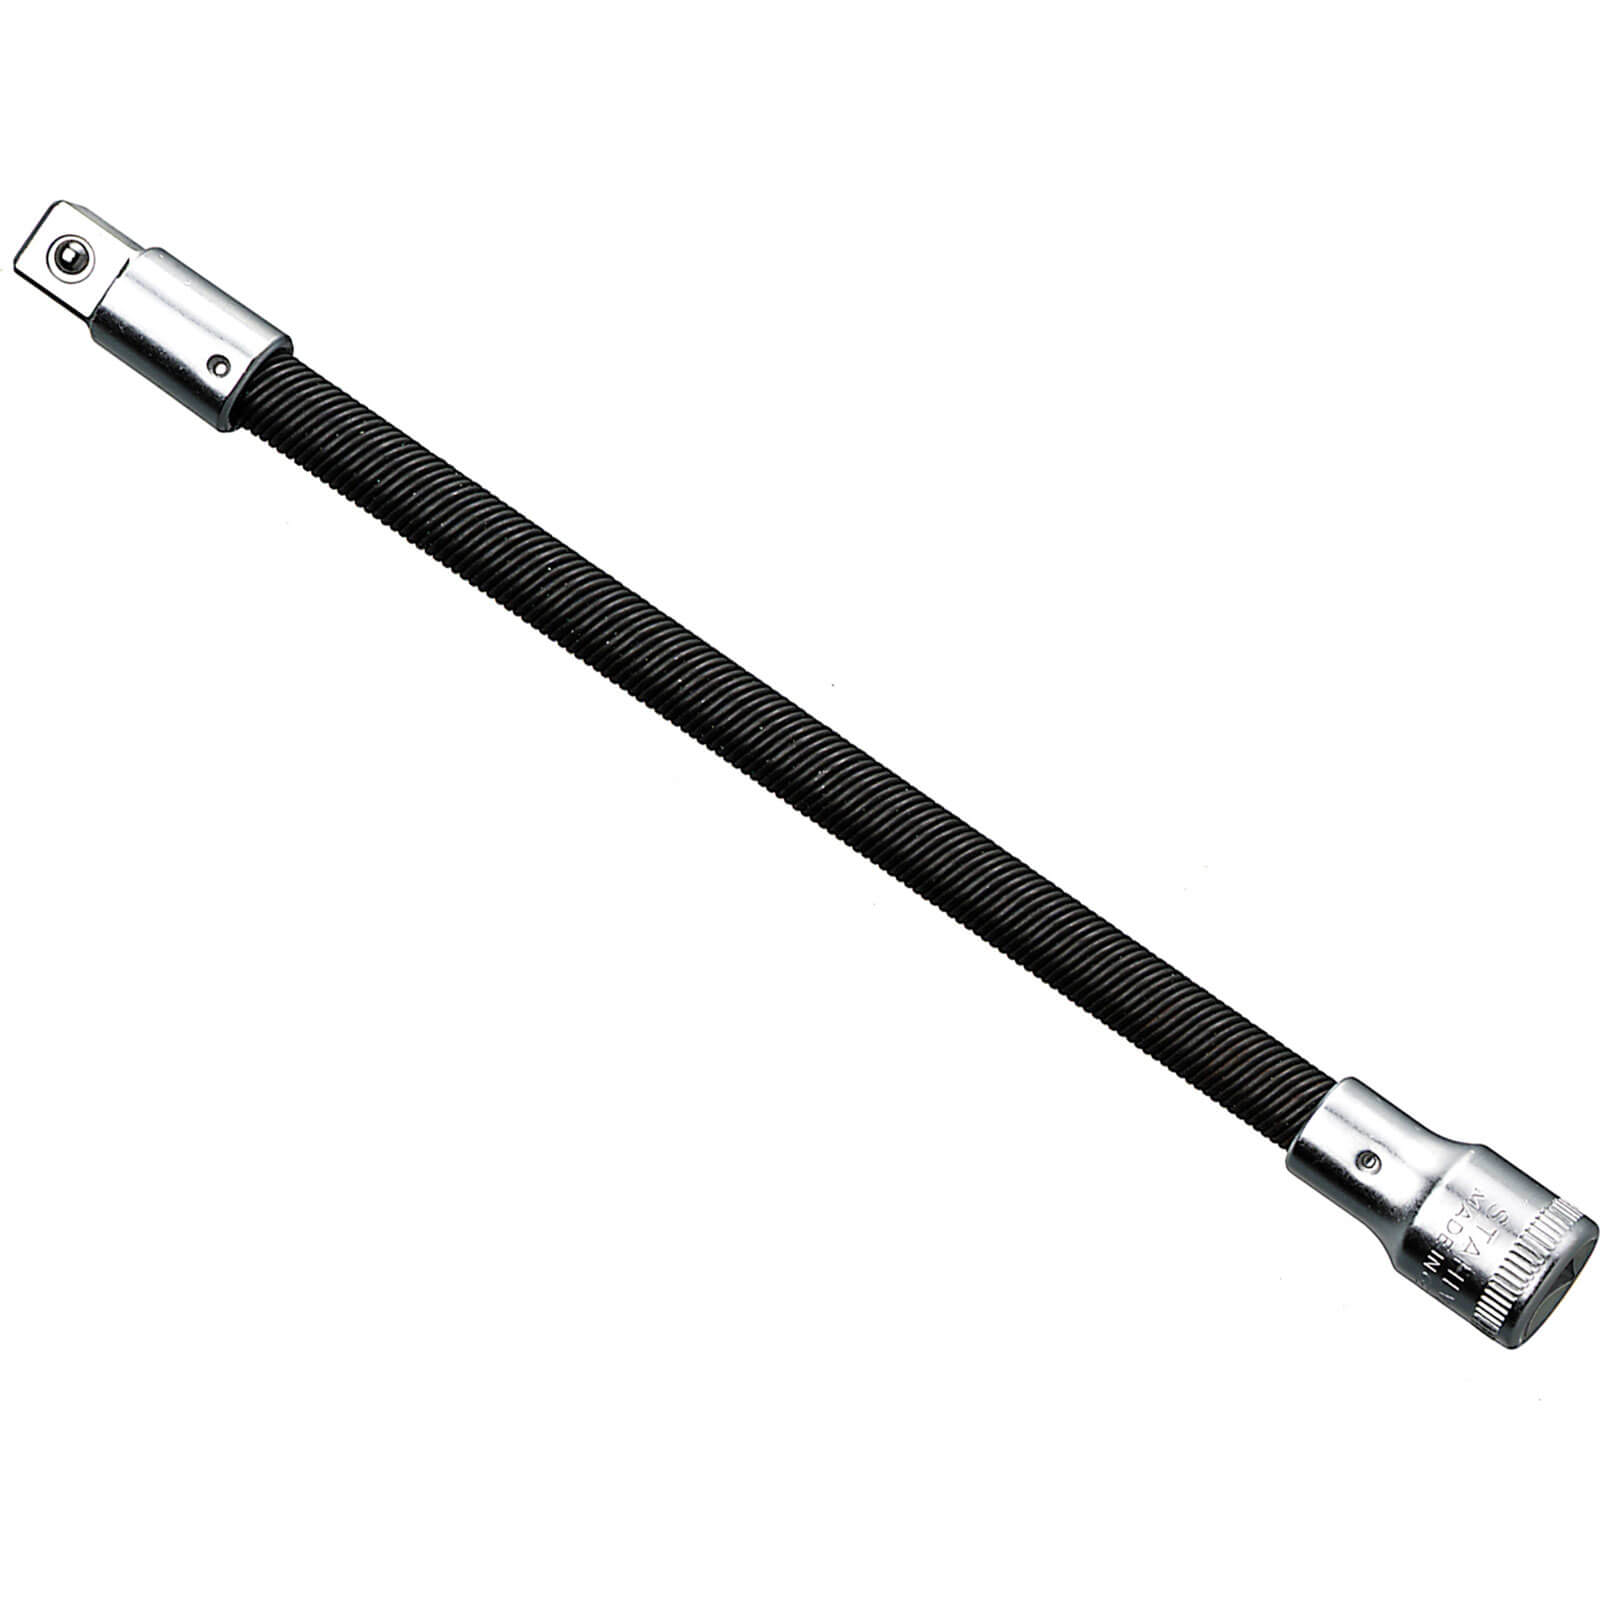 Image of Stahlwille 1/4" Drive Flexible Socket Extension Bar 1/4" 150mm